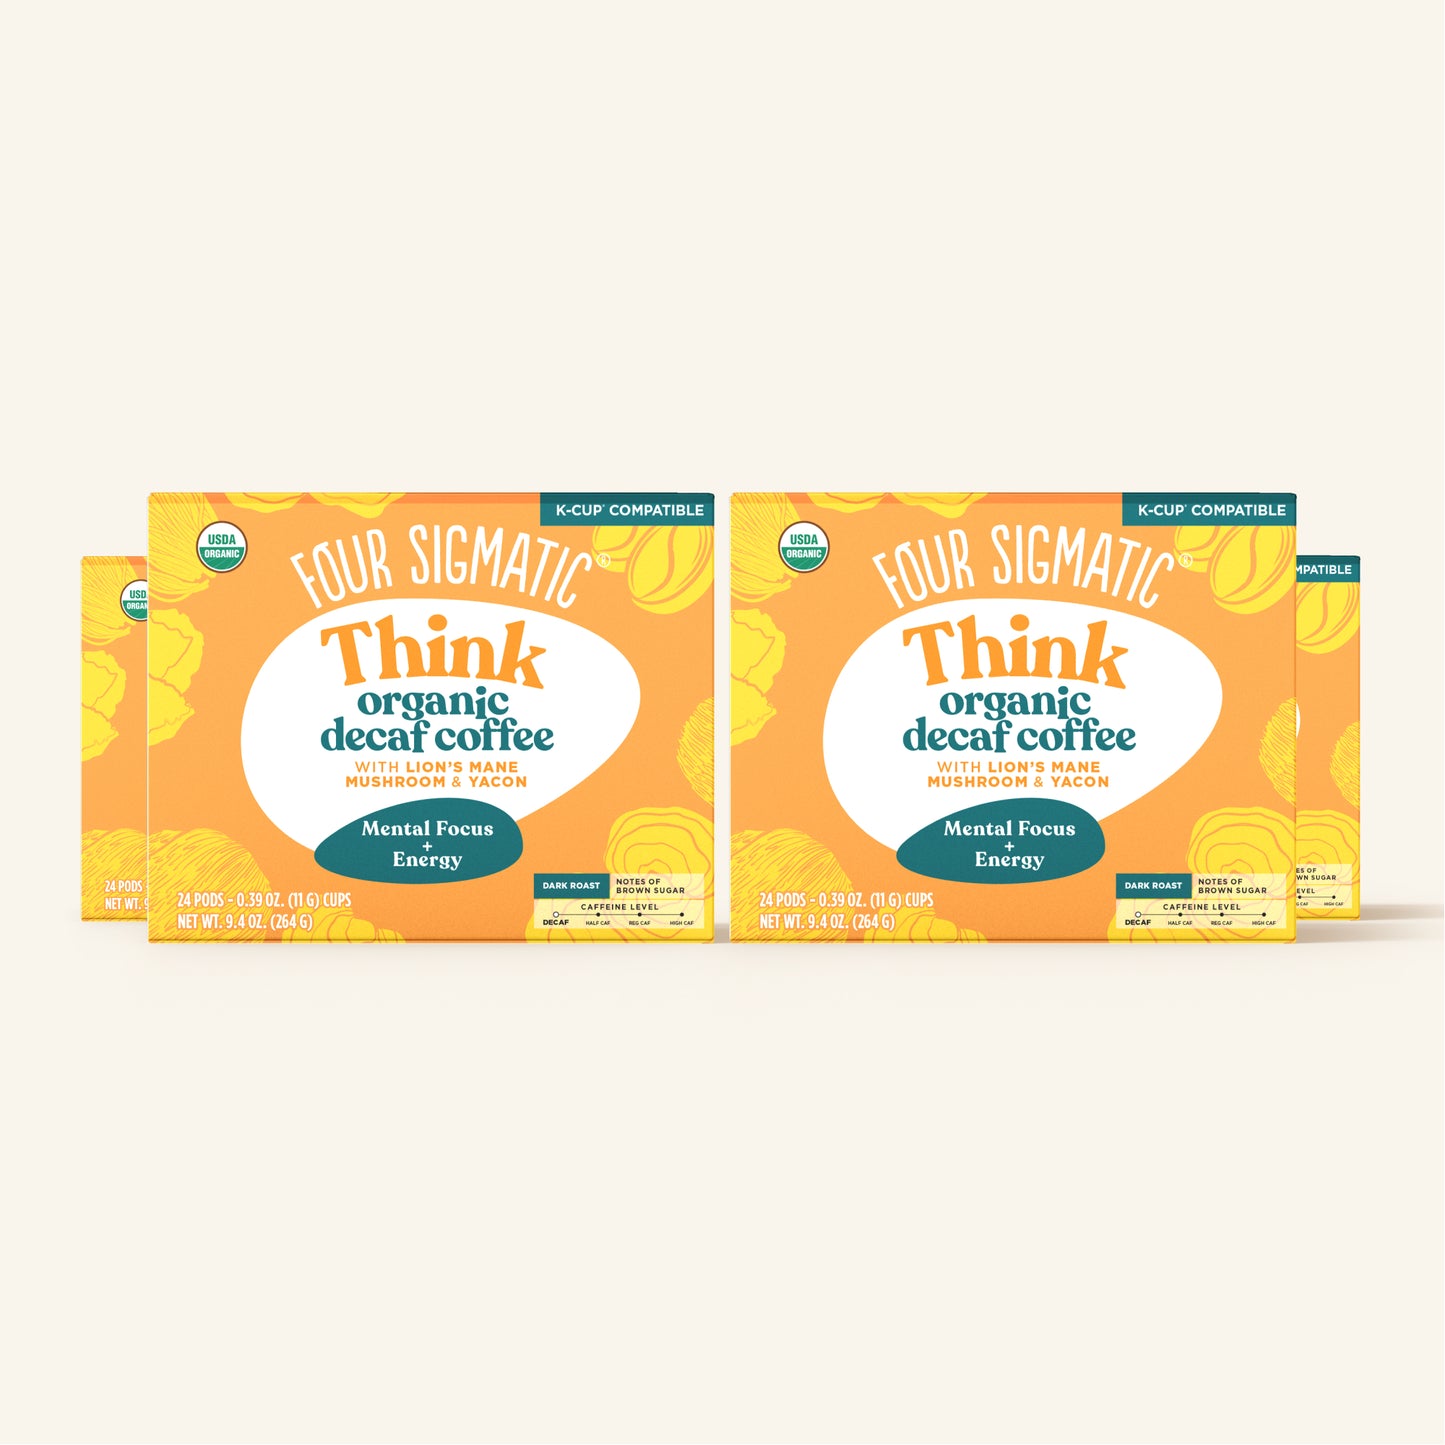 Think Decaf Coffee Pods Box- 24 count